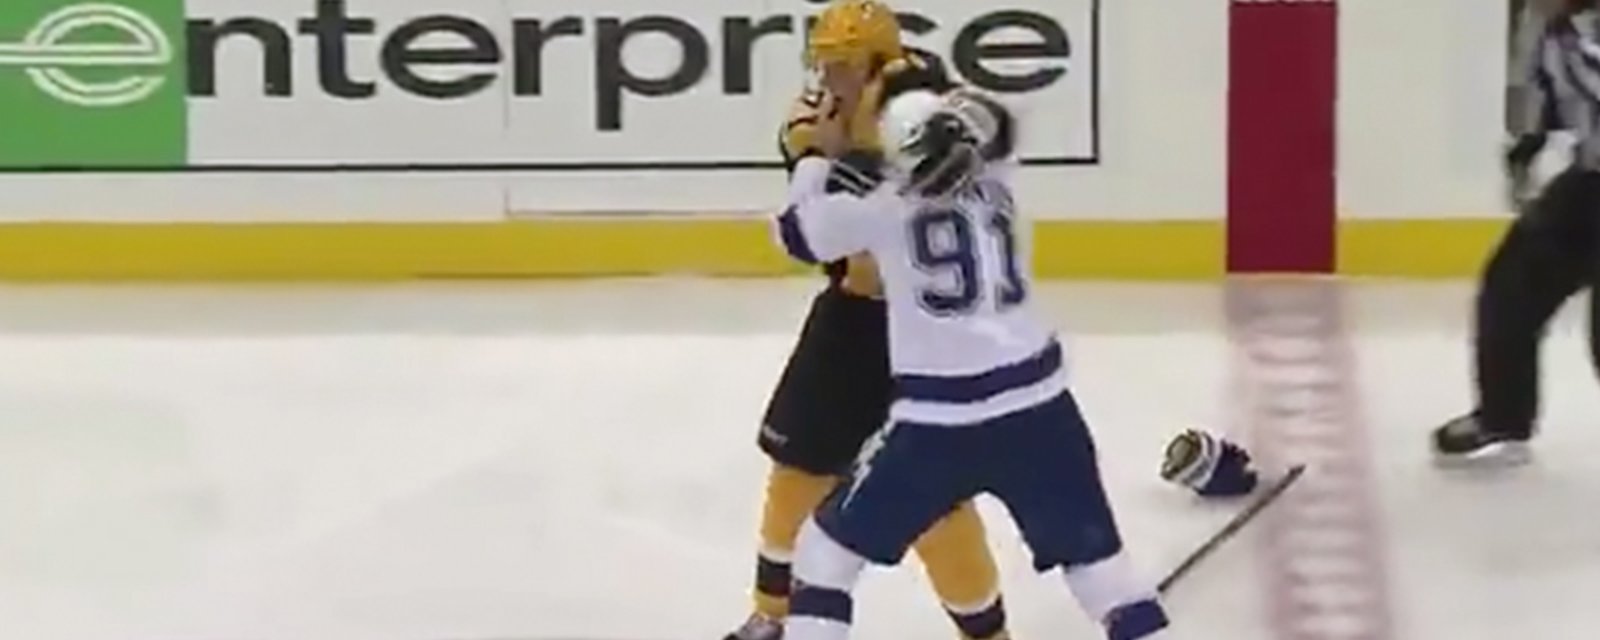 Malkin and Stamkos drop the gloves and go at it!